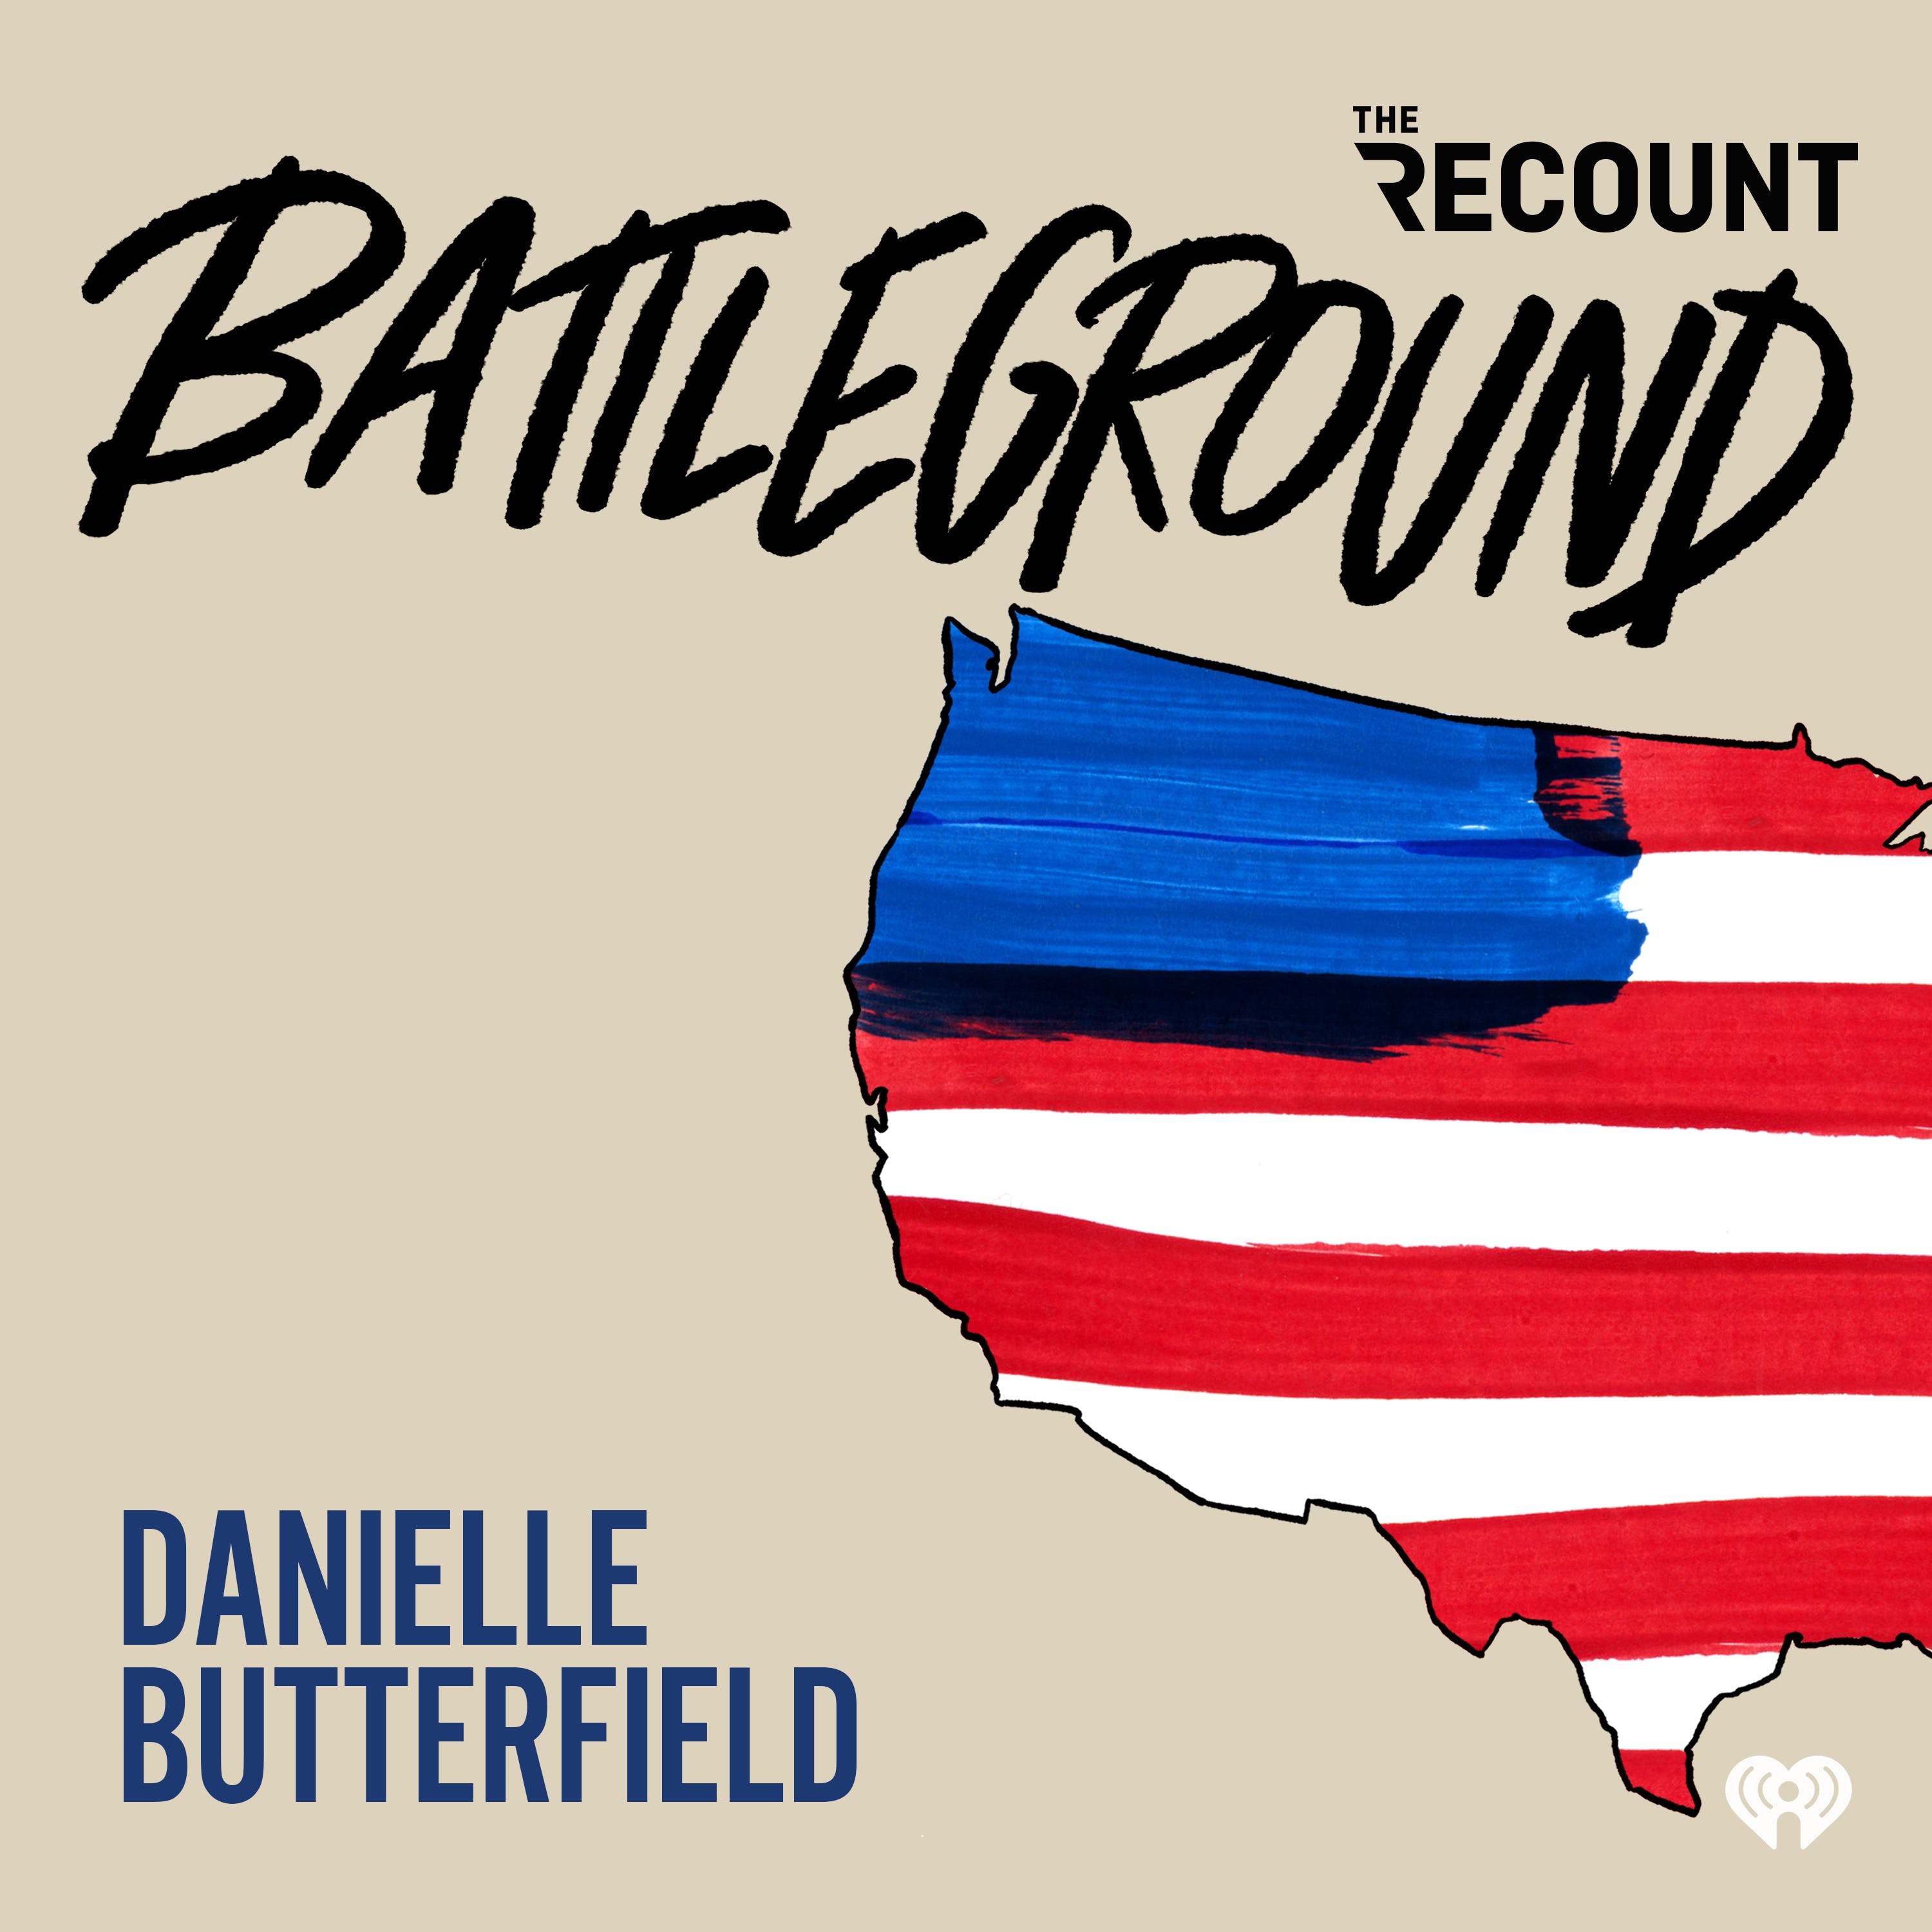 How to Spend Ad $$ with Danielle Butterfield of Priorities USA